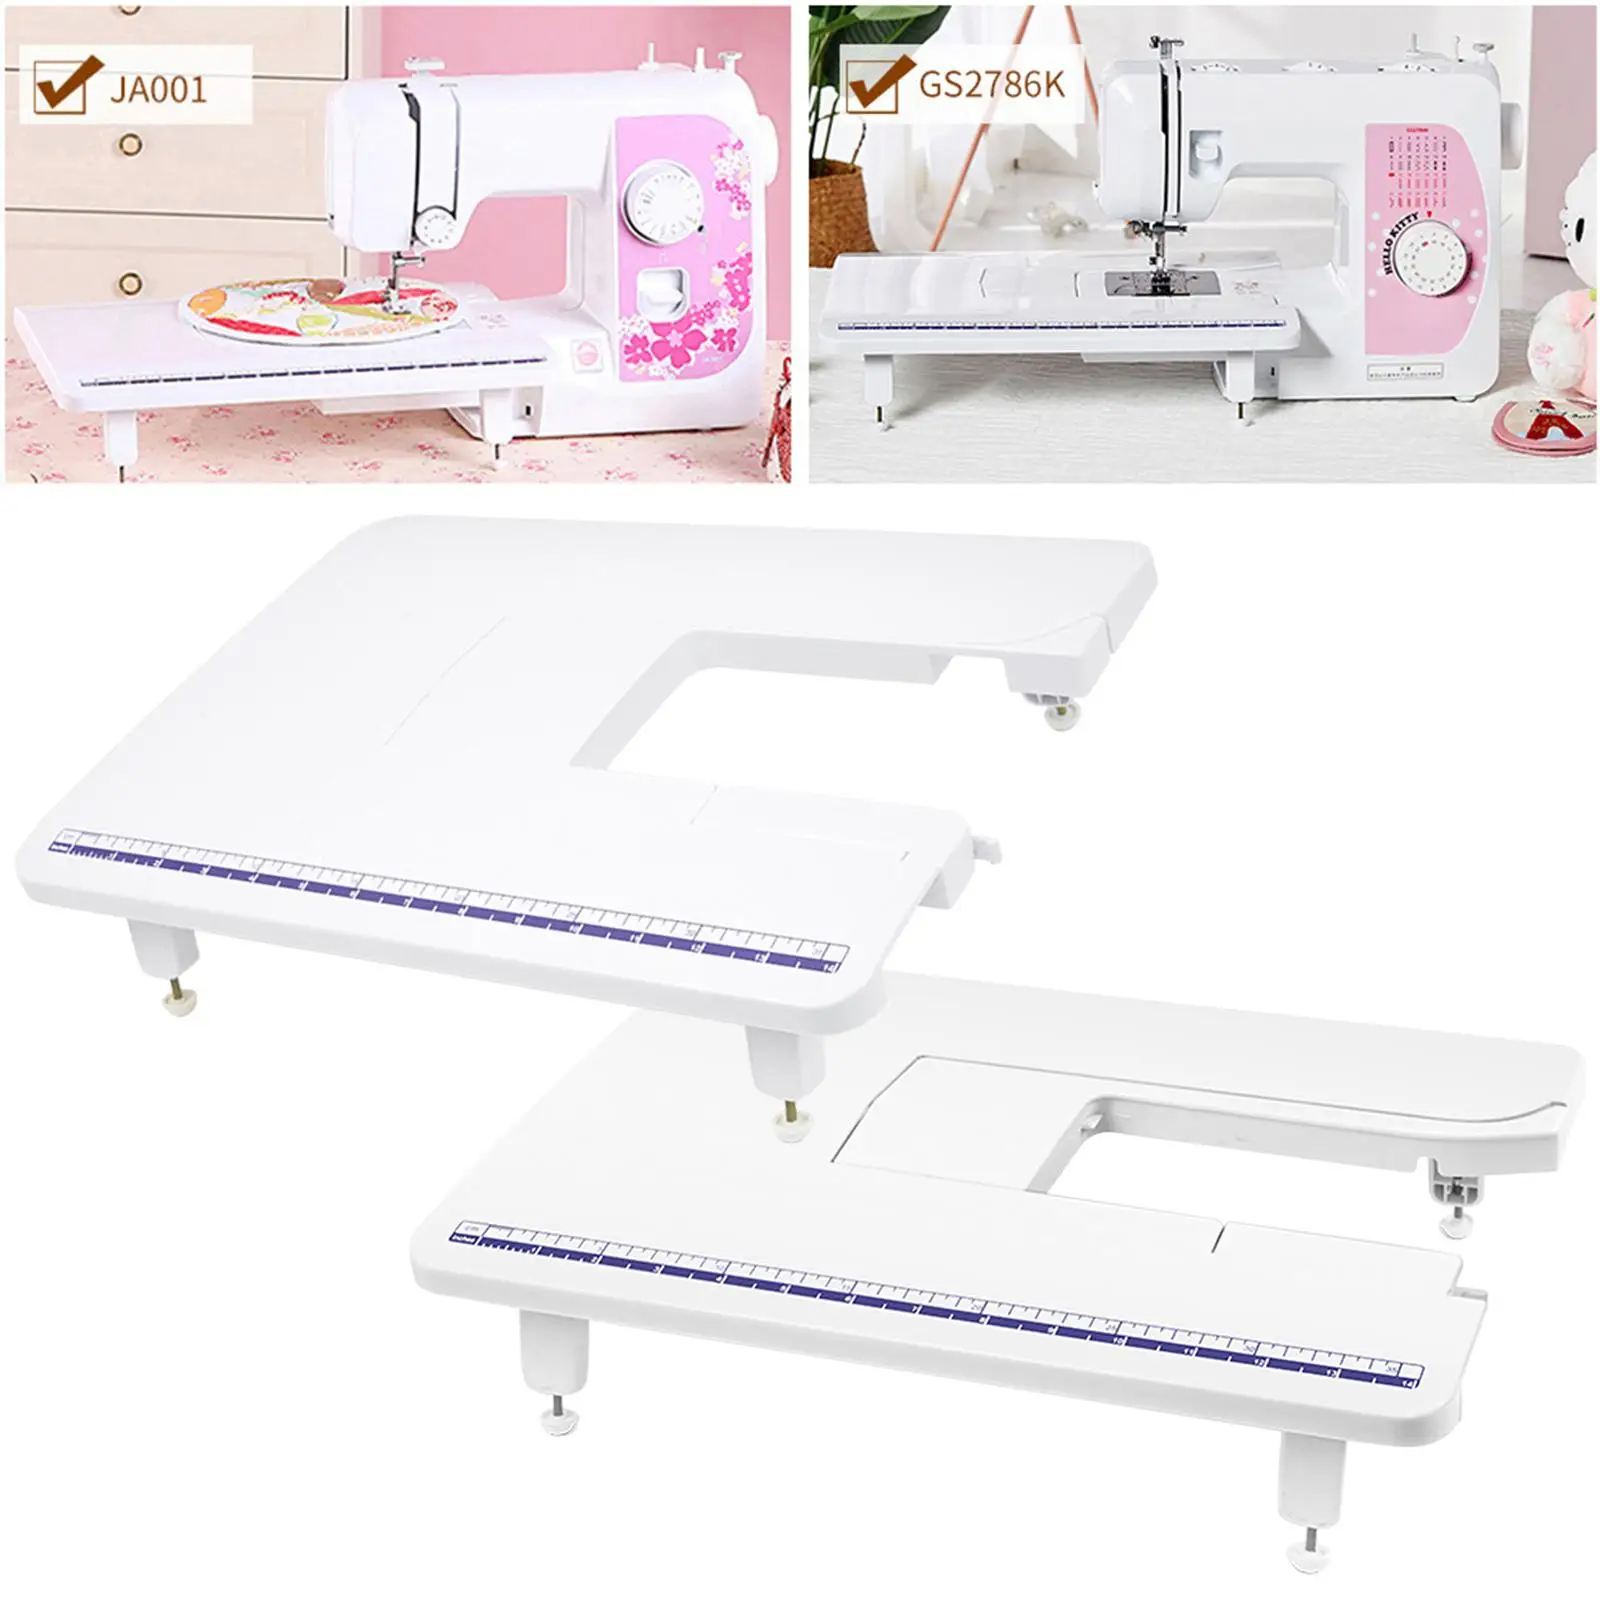 Adjustable Sewing Machine Wide Extension Table  Comfortable Sewing Machine Removable Extension Table for 86K JA001 AS1450